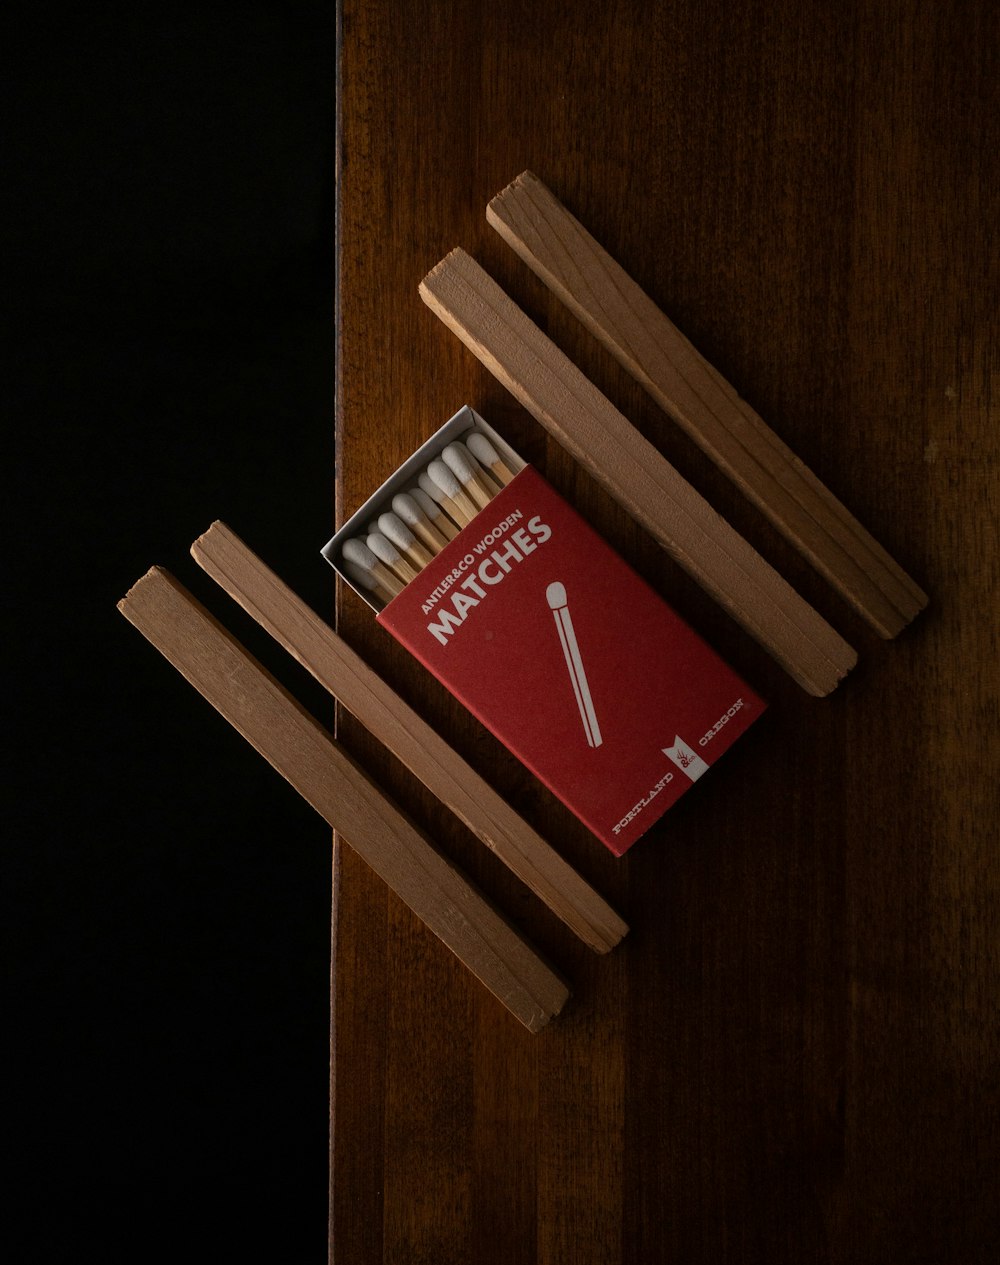 red pall mall cigarette pack on brown wooden surface